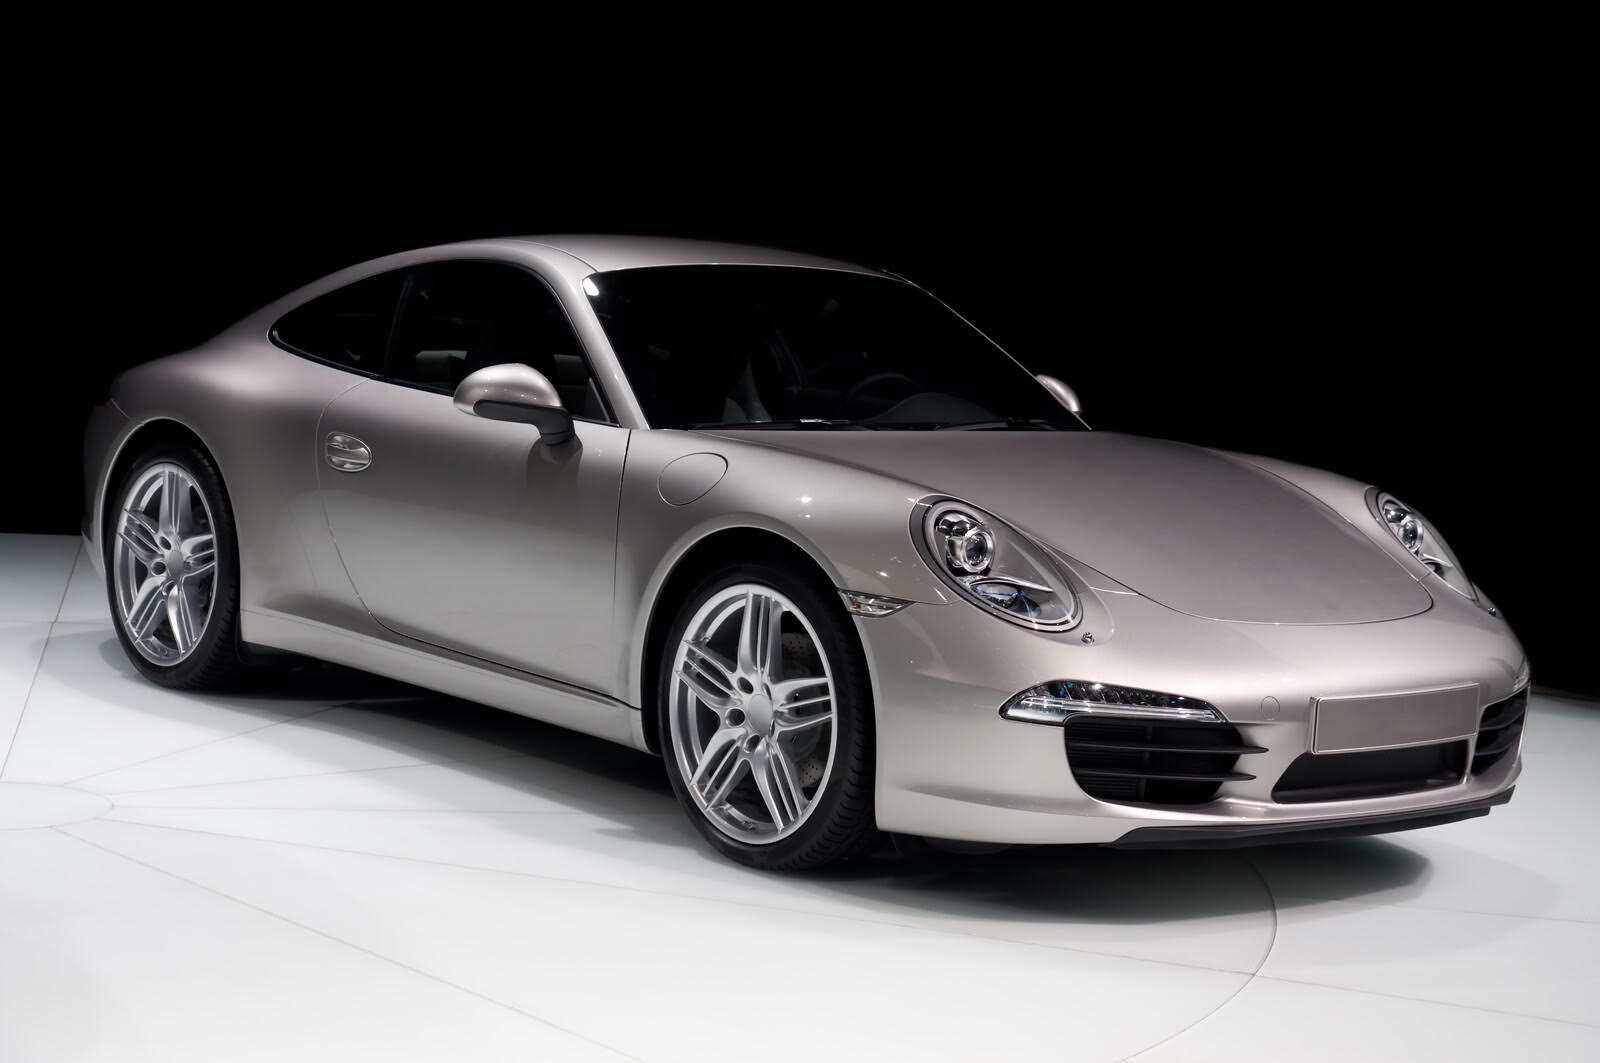 Top Repair Issues Our Porsche Certified Mechanic Comes Across